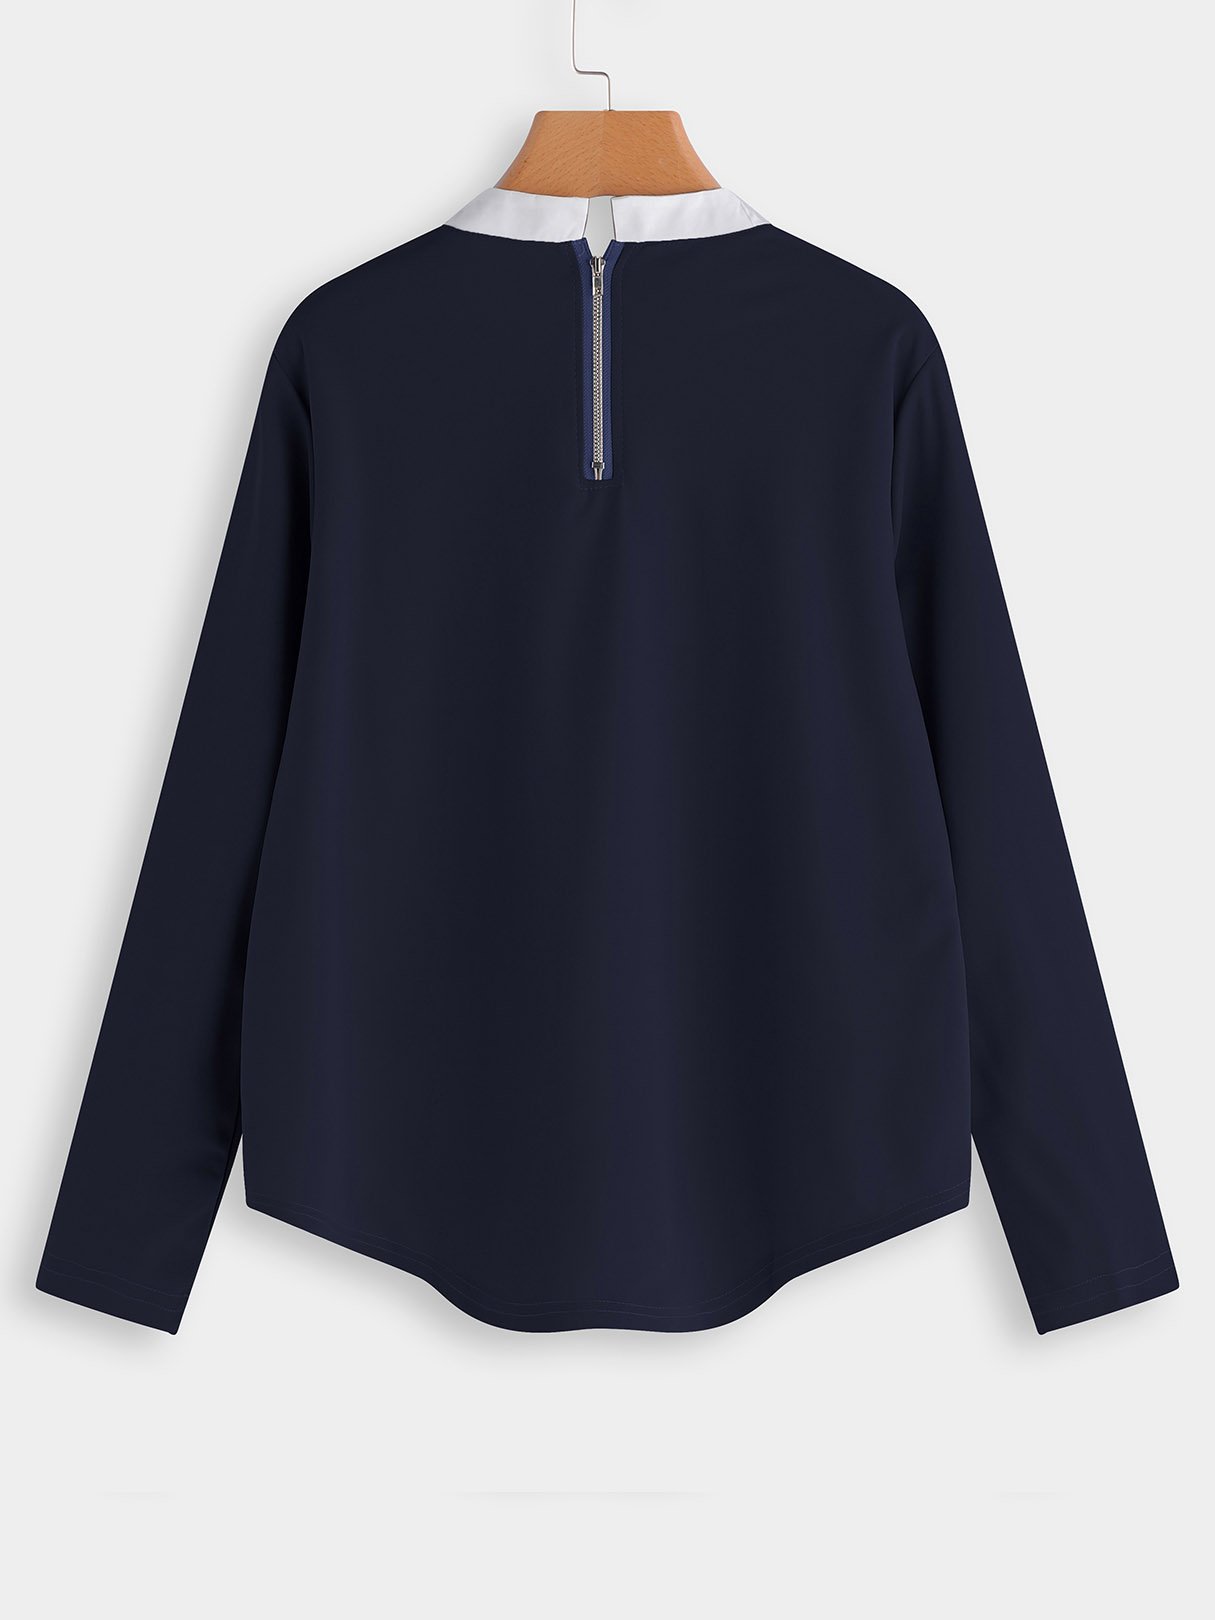 NEW FEELING Womens Navy Plus Size Tops